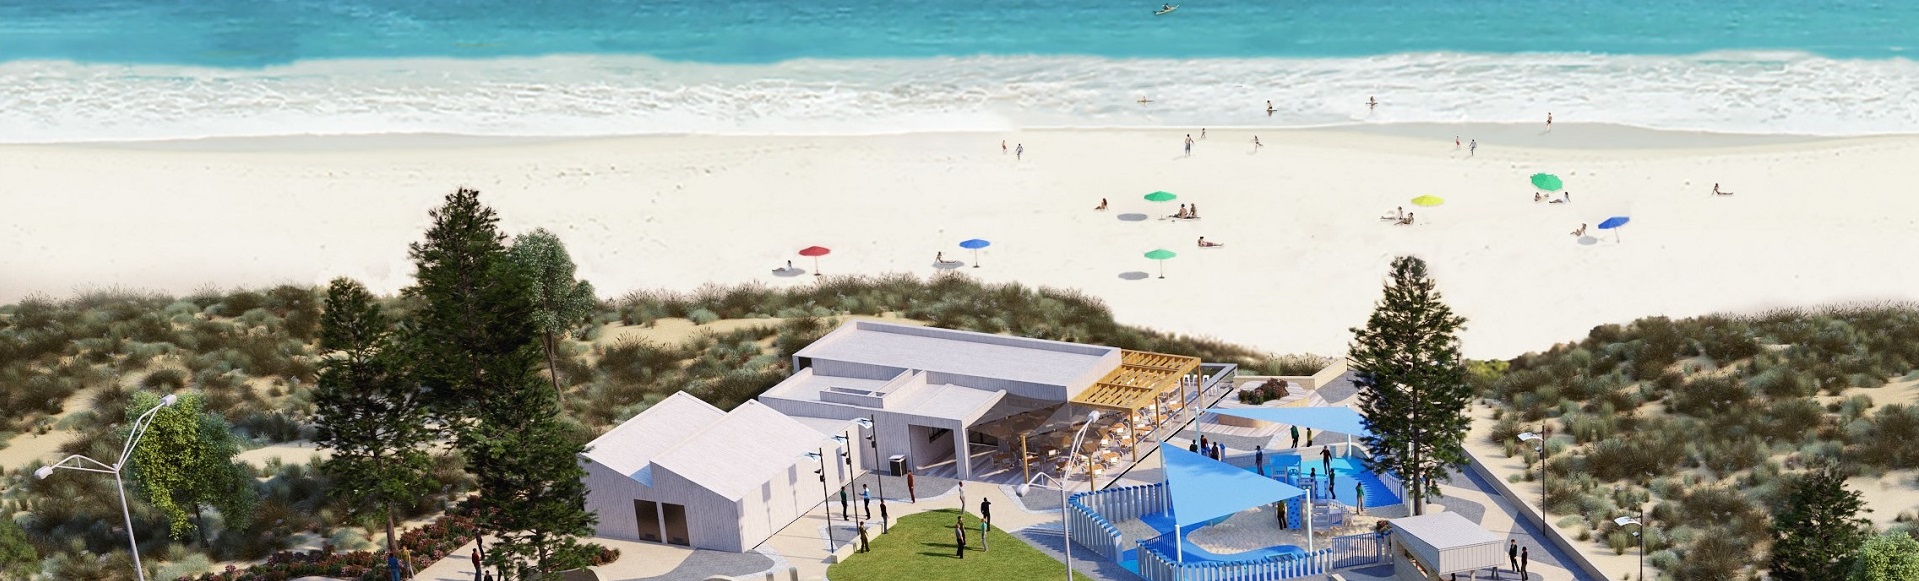 An artist's impression of the new foreshore project at Stockland's Amberton community in Eglington (WA), which commenced construction on 6 October 2017.